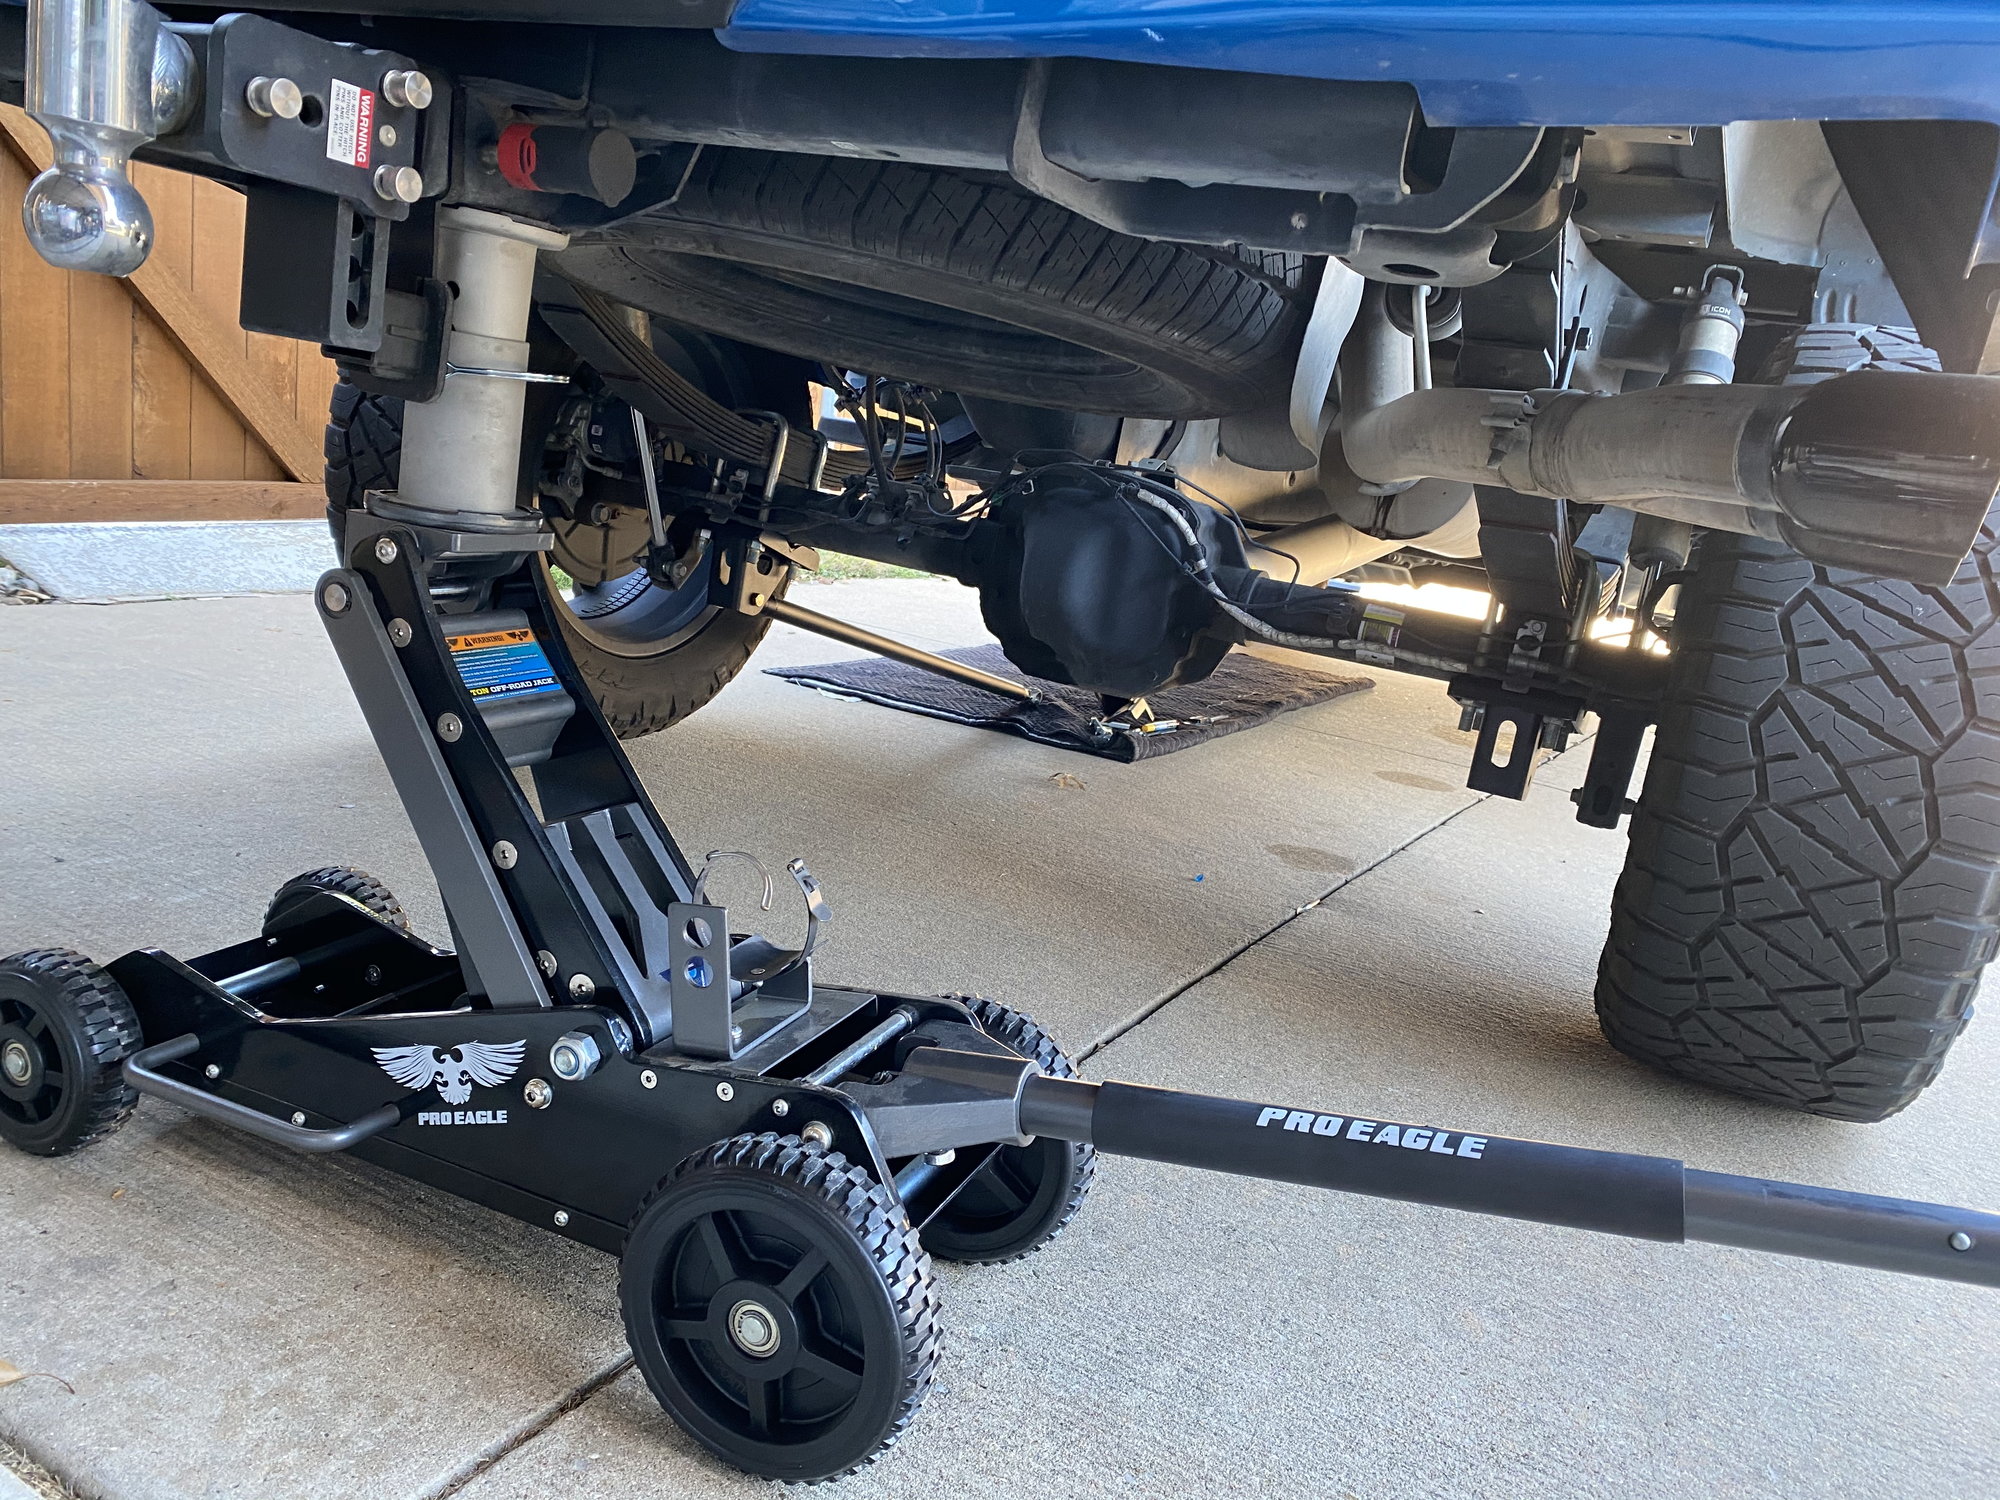 What Floor Jack Do You Use On Your F150 Ford F150 Forum Community Of Ford Truck Fans